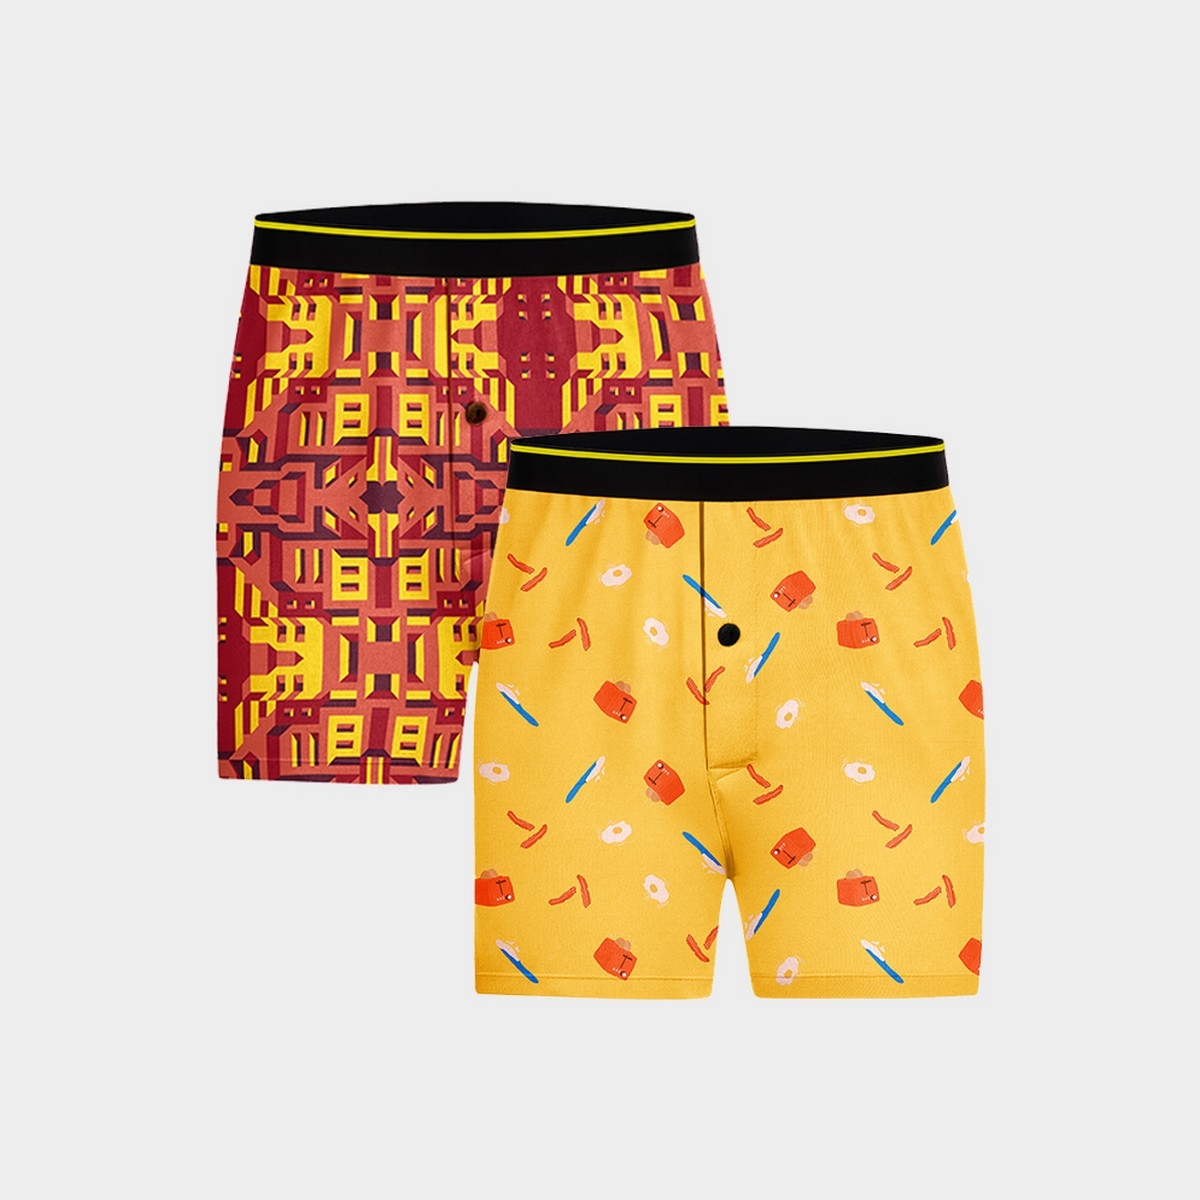 Bummer | Bummer Brekkie and Bricked Micro Modal Boxer- Pack of 2 For Men